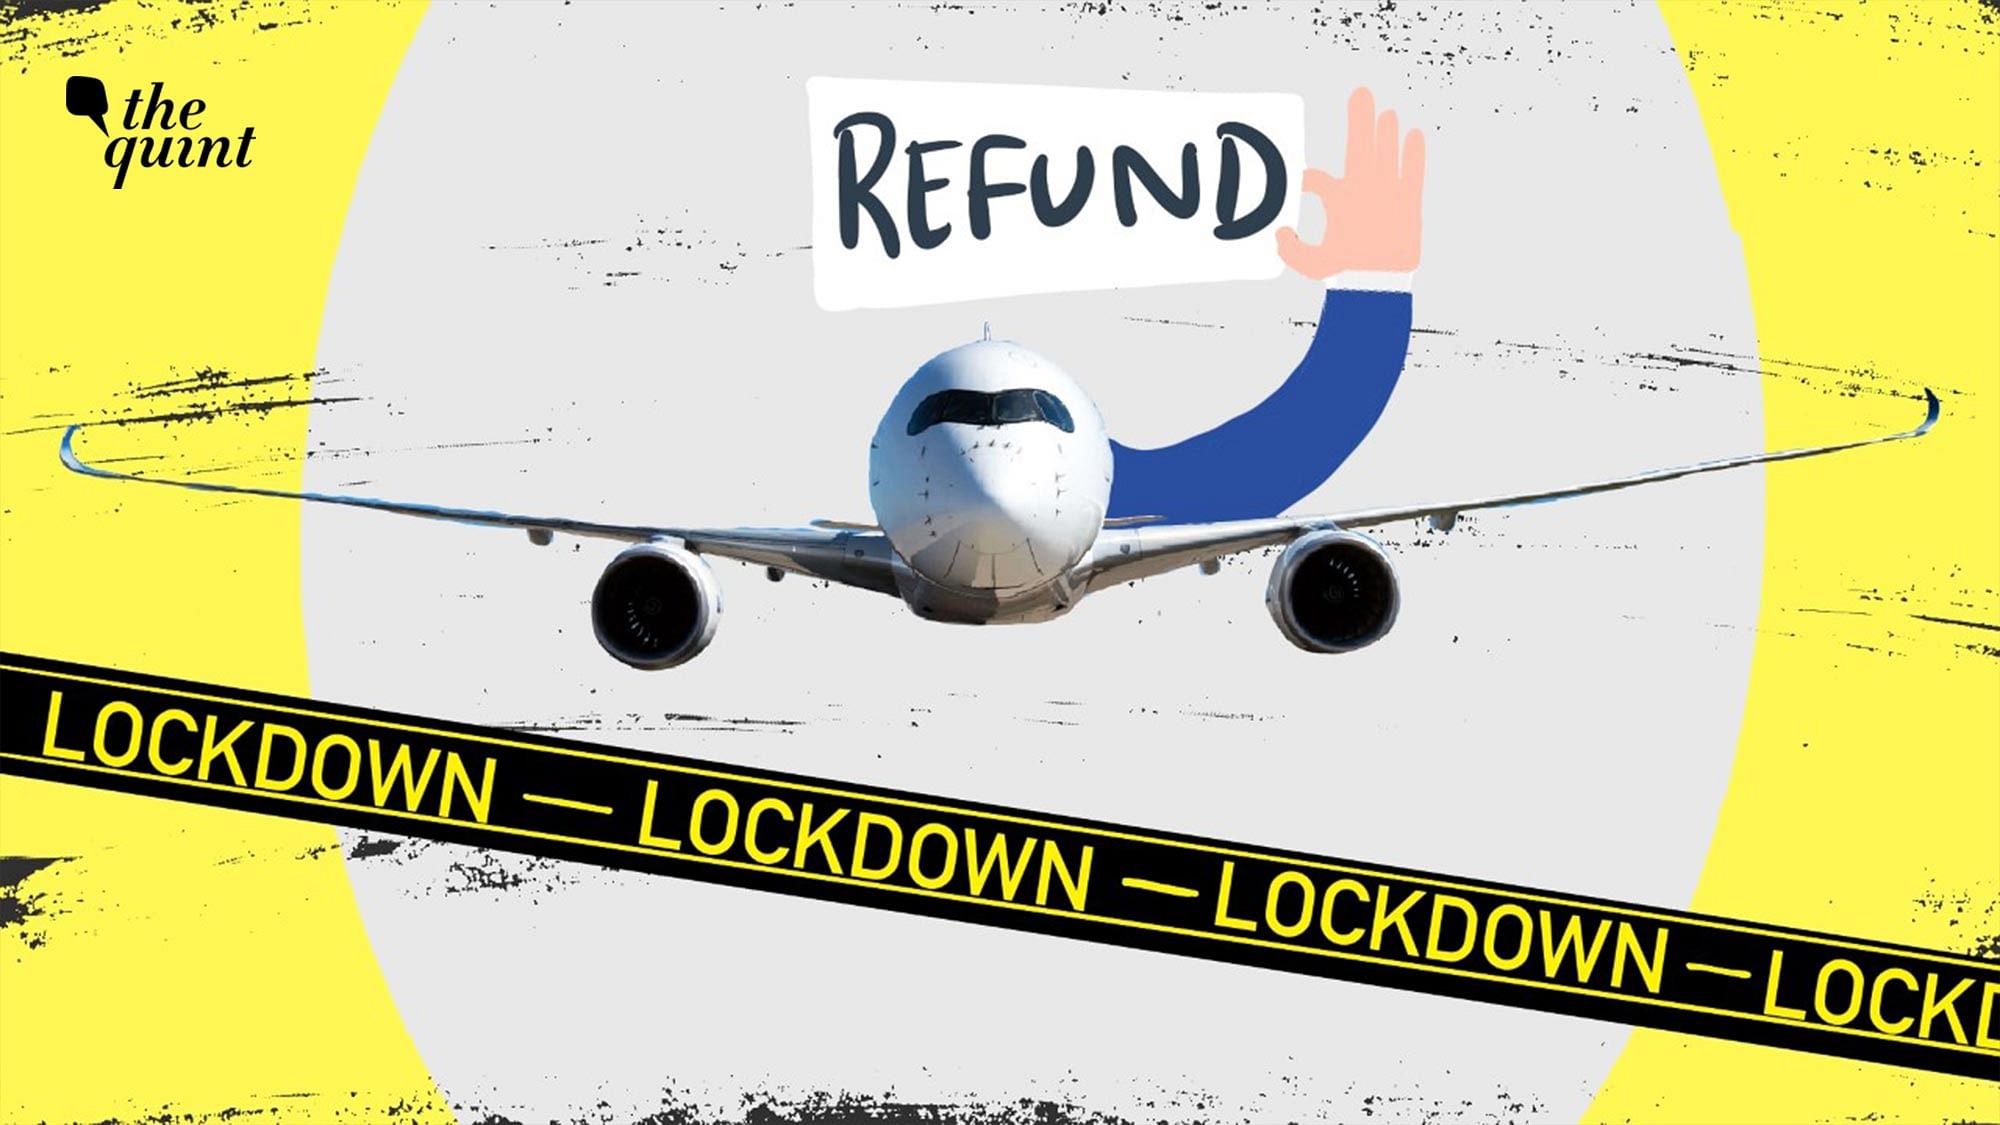 Are you eligible for complete refund of your air ticket booked during lockdown? Read to find out.